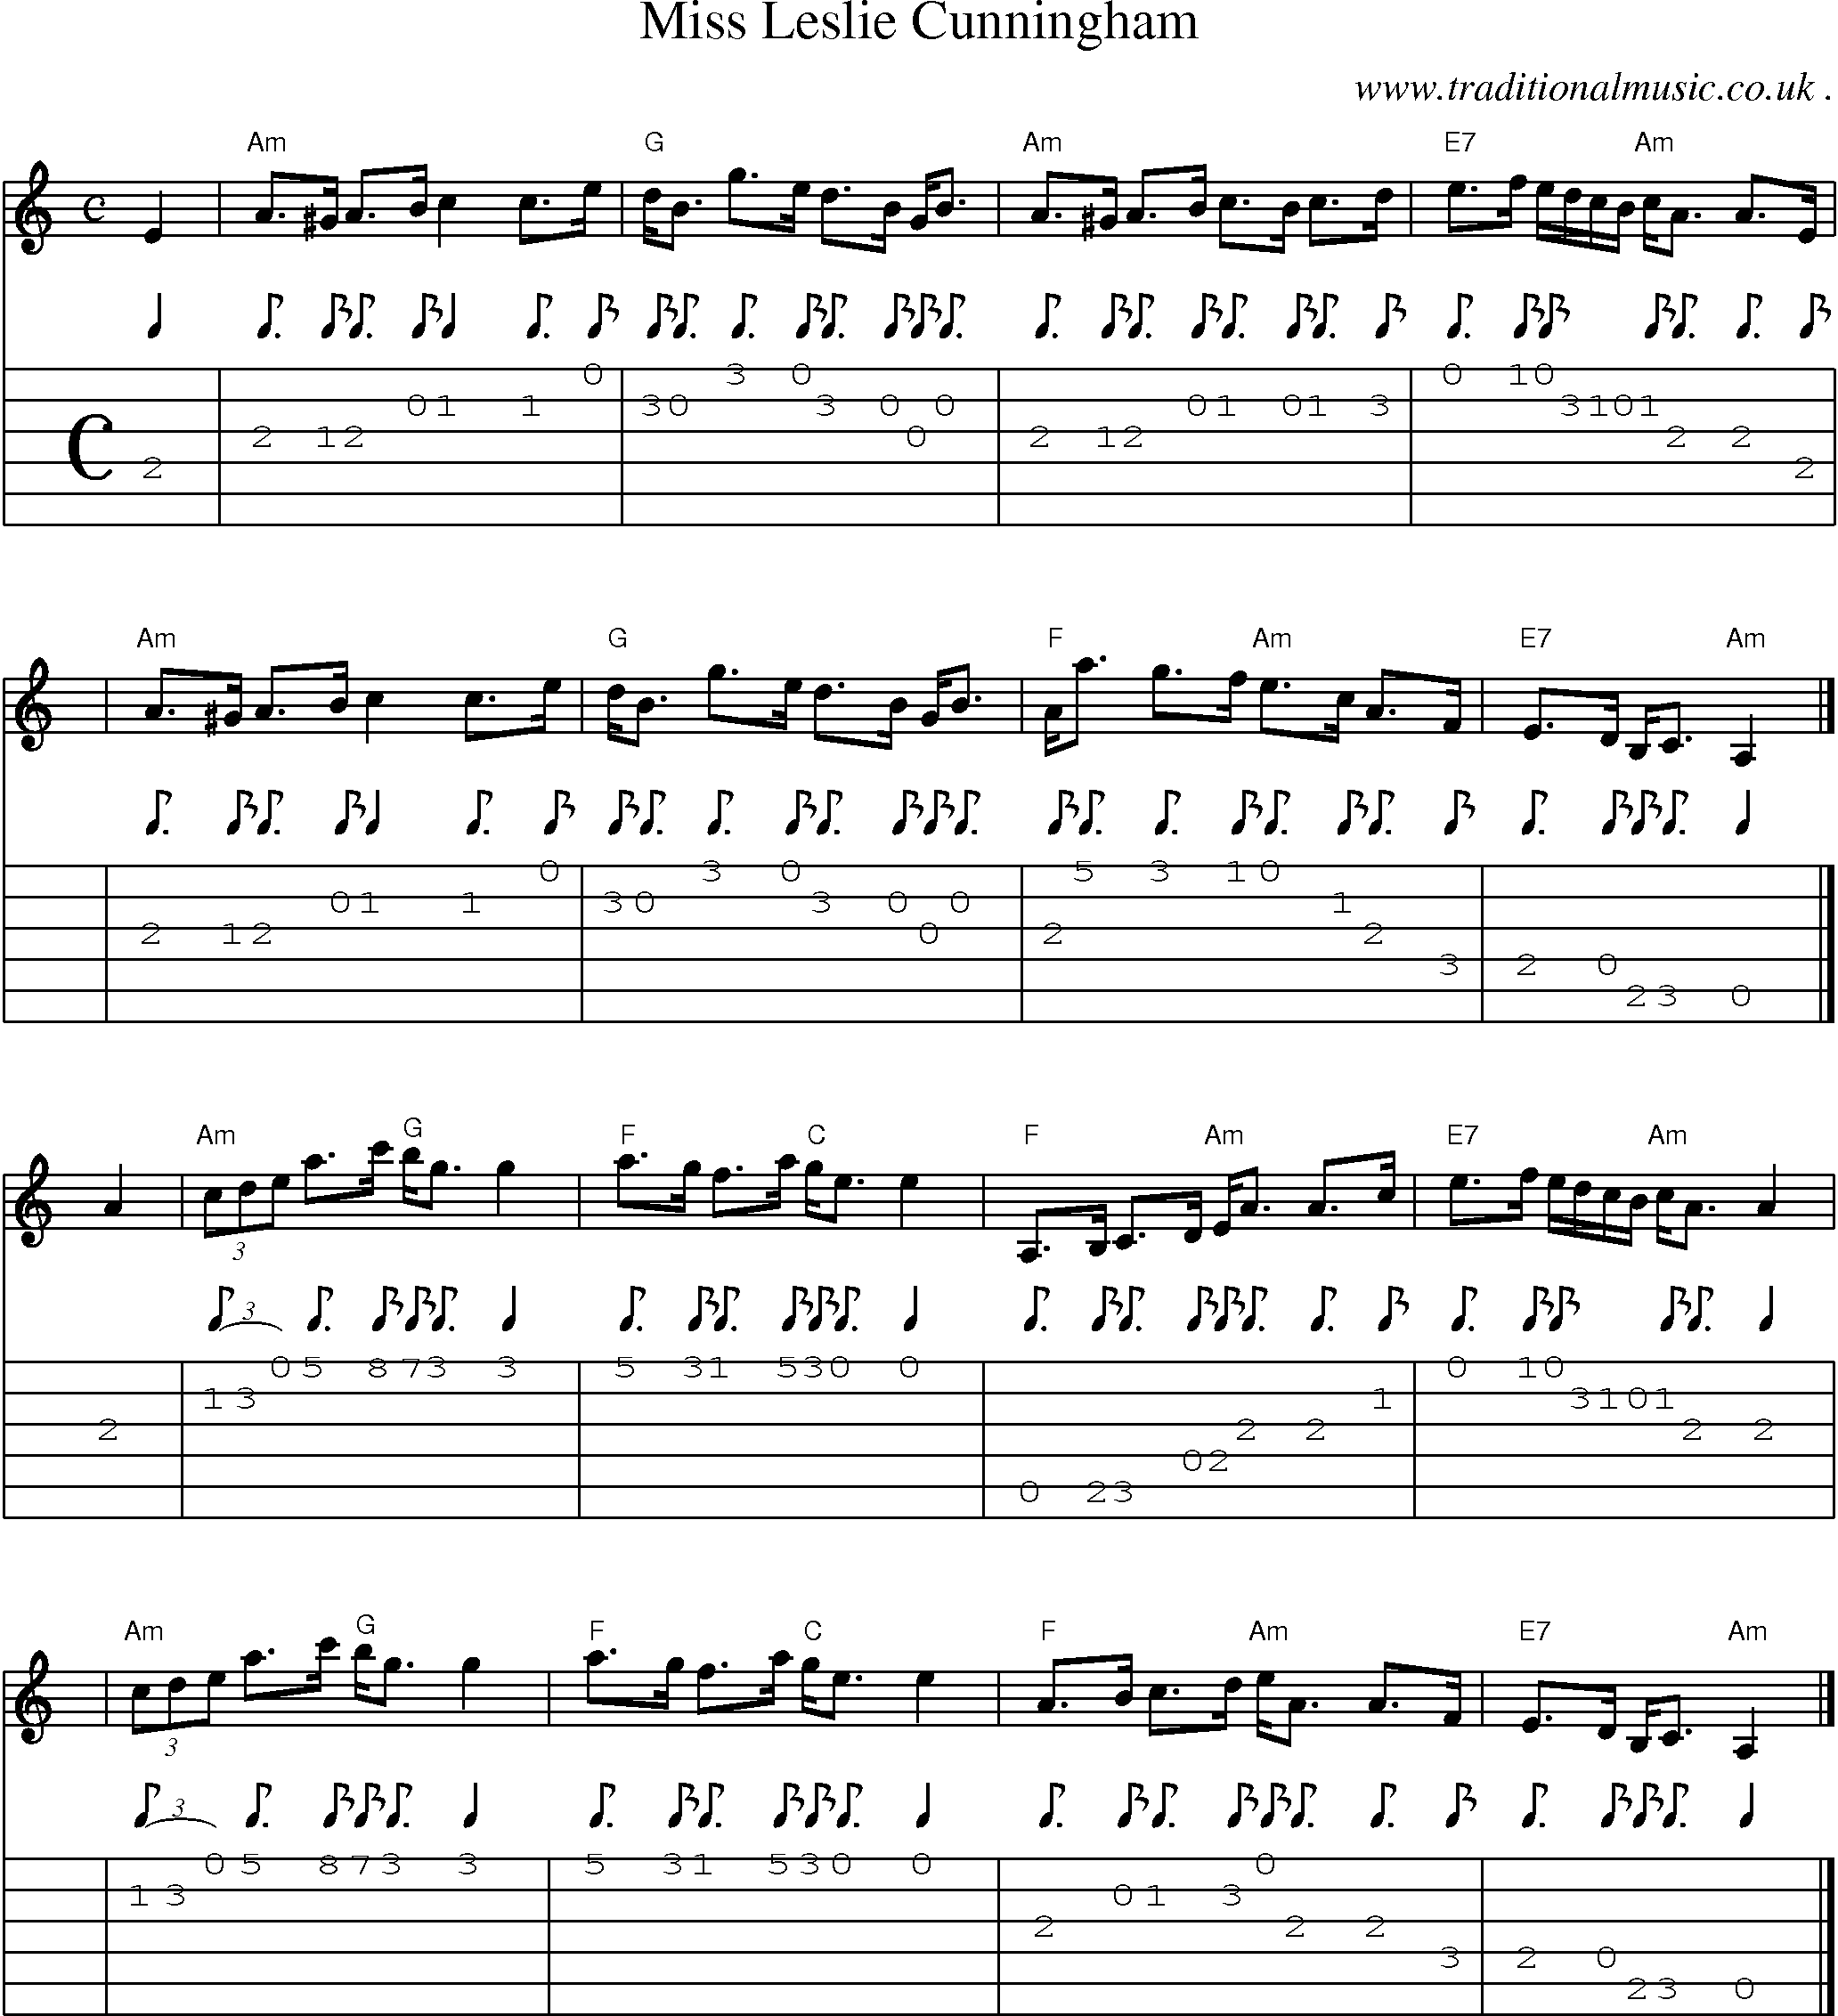 Sheet-music  score, Chords and Guitar Tabs for Miss Leslie Cunningham